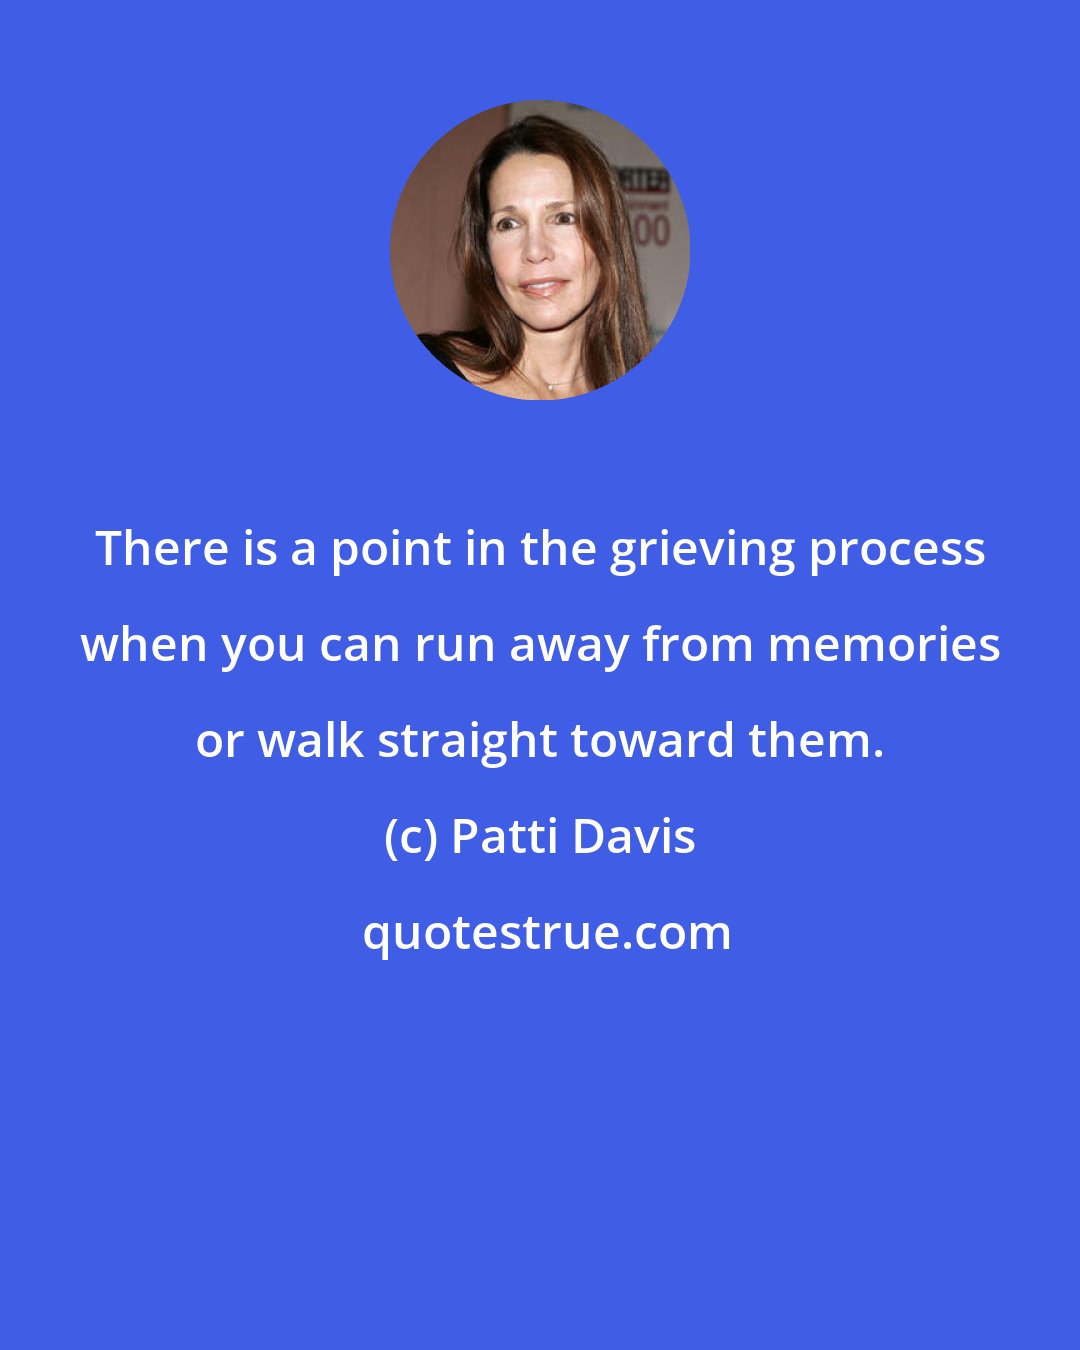 Patti Davis: There is a point in the grieving process when you can run away from memories or walk straight toward them.